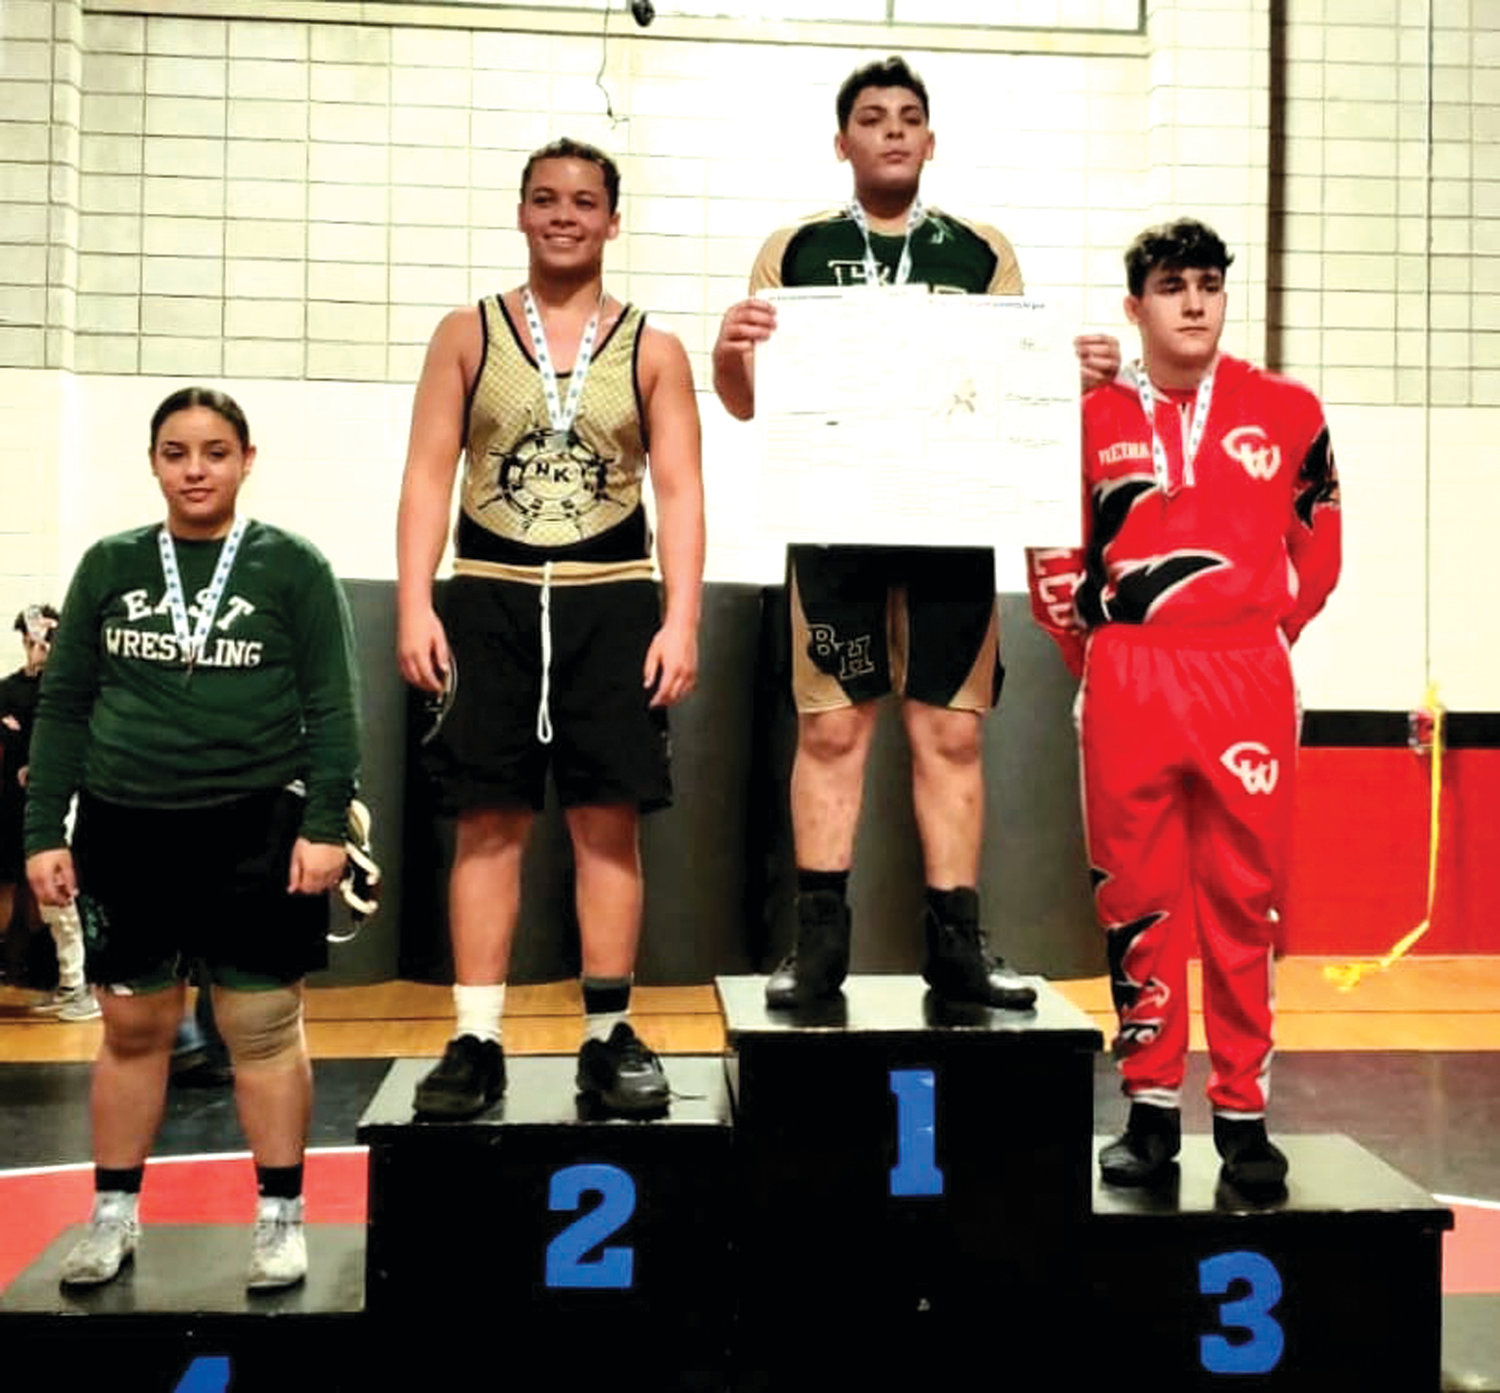 PROLIFIC PERFORMER: Johnston resident and Bishop Hendricken freshman Michael Camarena (third left) stands atop the Olympic-style platform inside Coventry High’s C. Arthur Flori Gymnasium where he won both the freshman and junior varsity state championships. He’s joined by Alexis Franco, fourth place Cranston East; Malcolm Lima, runner-up from NK; and David Vieira, Cranston West.